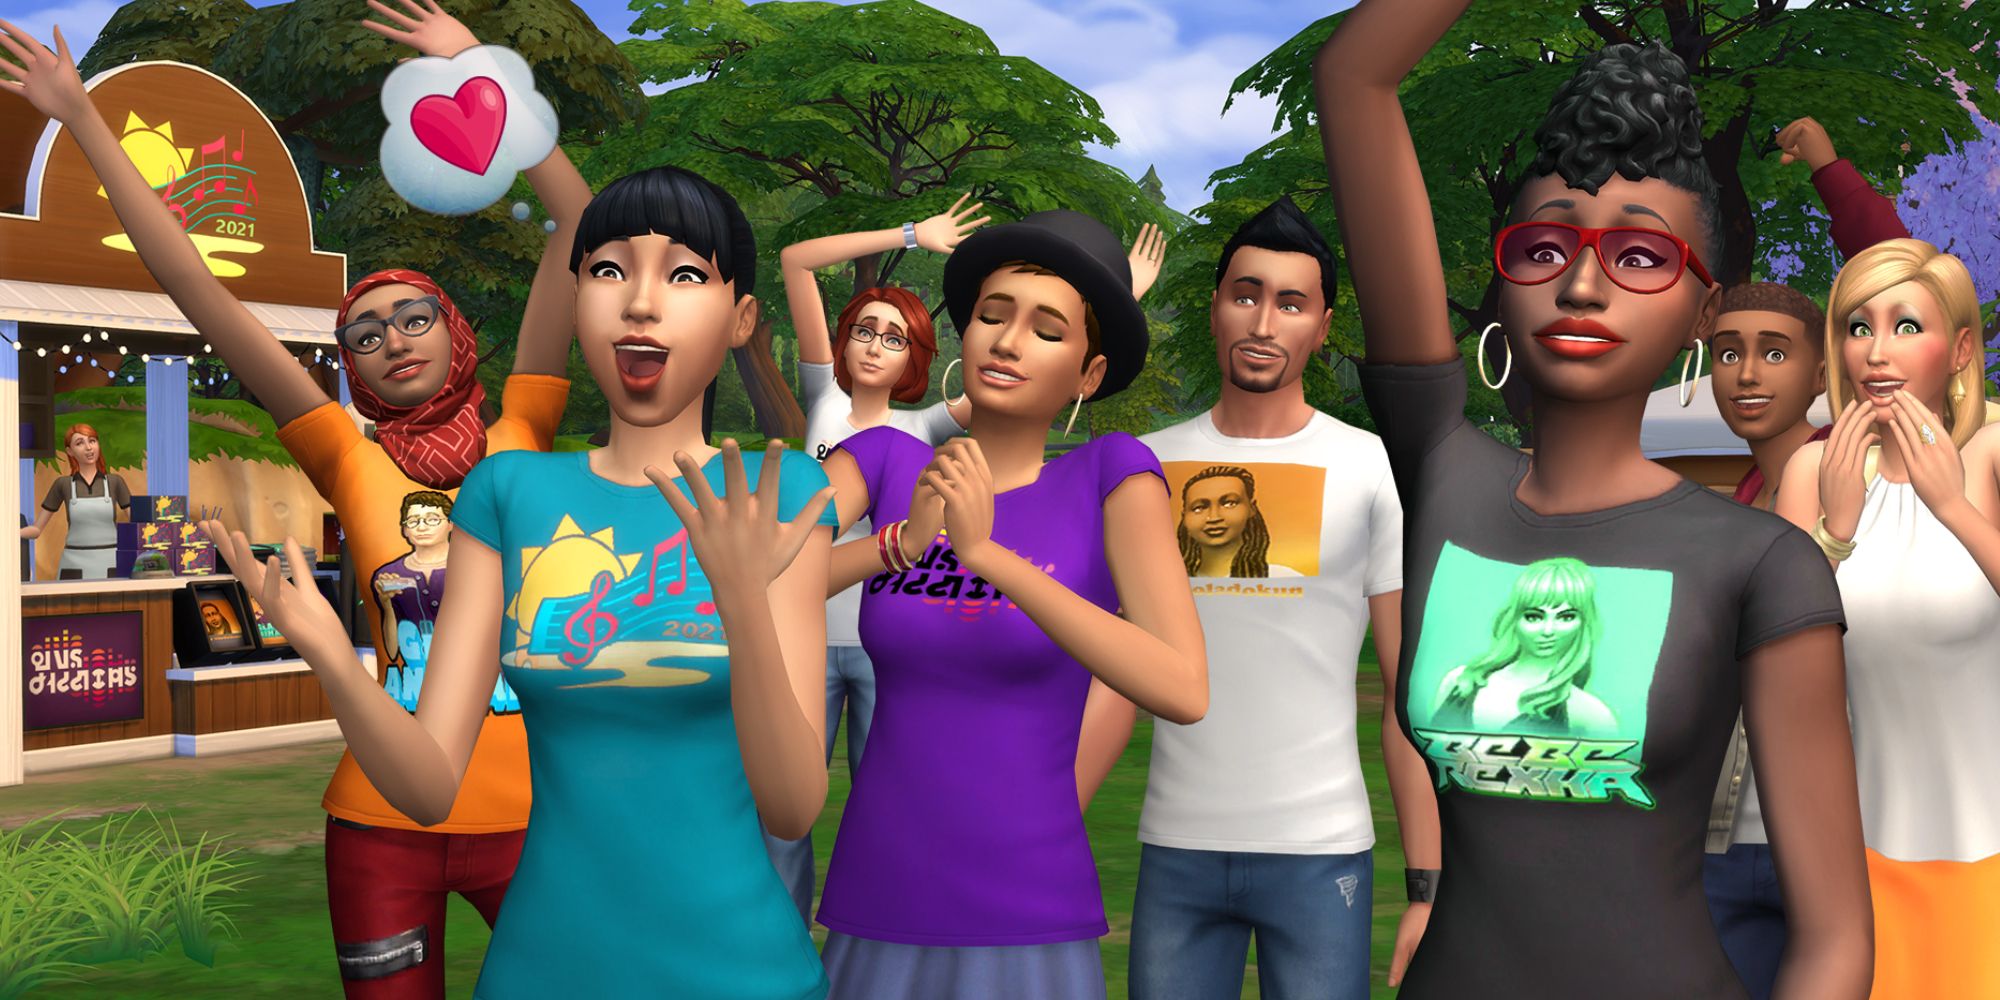 Sims 4 crowd of sims at a festival cheering